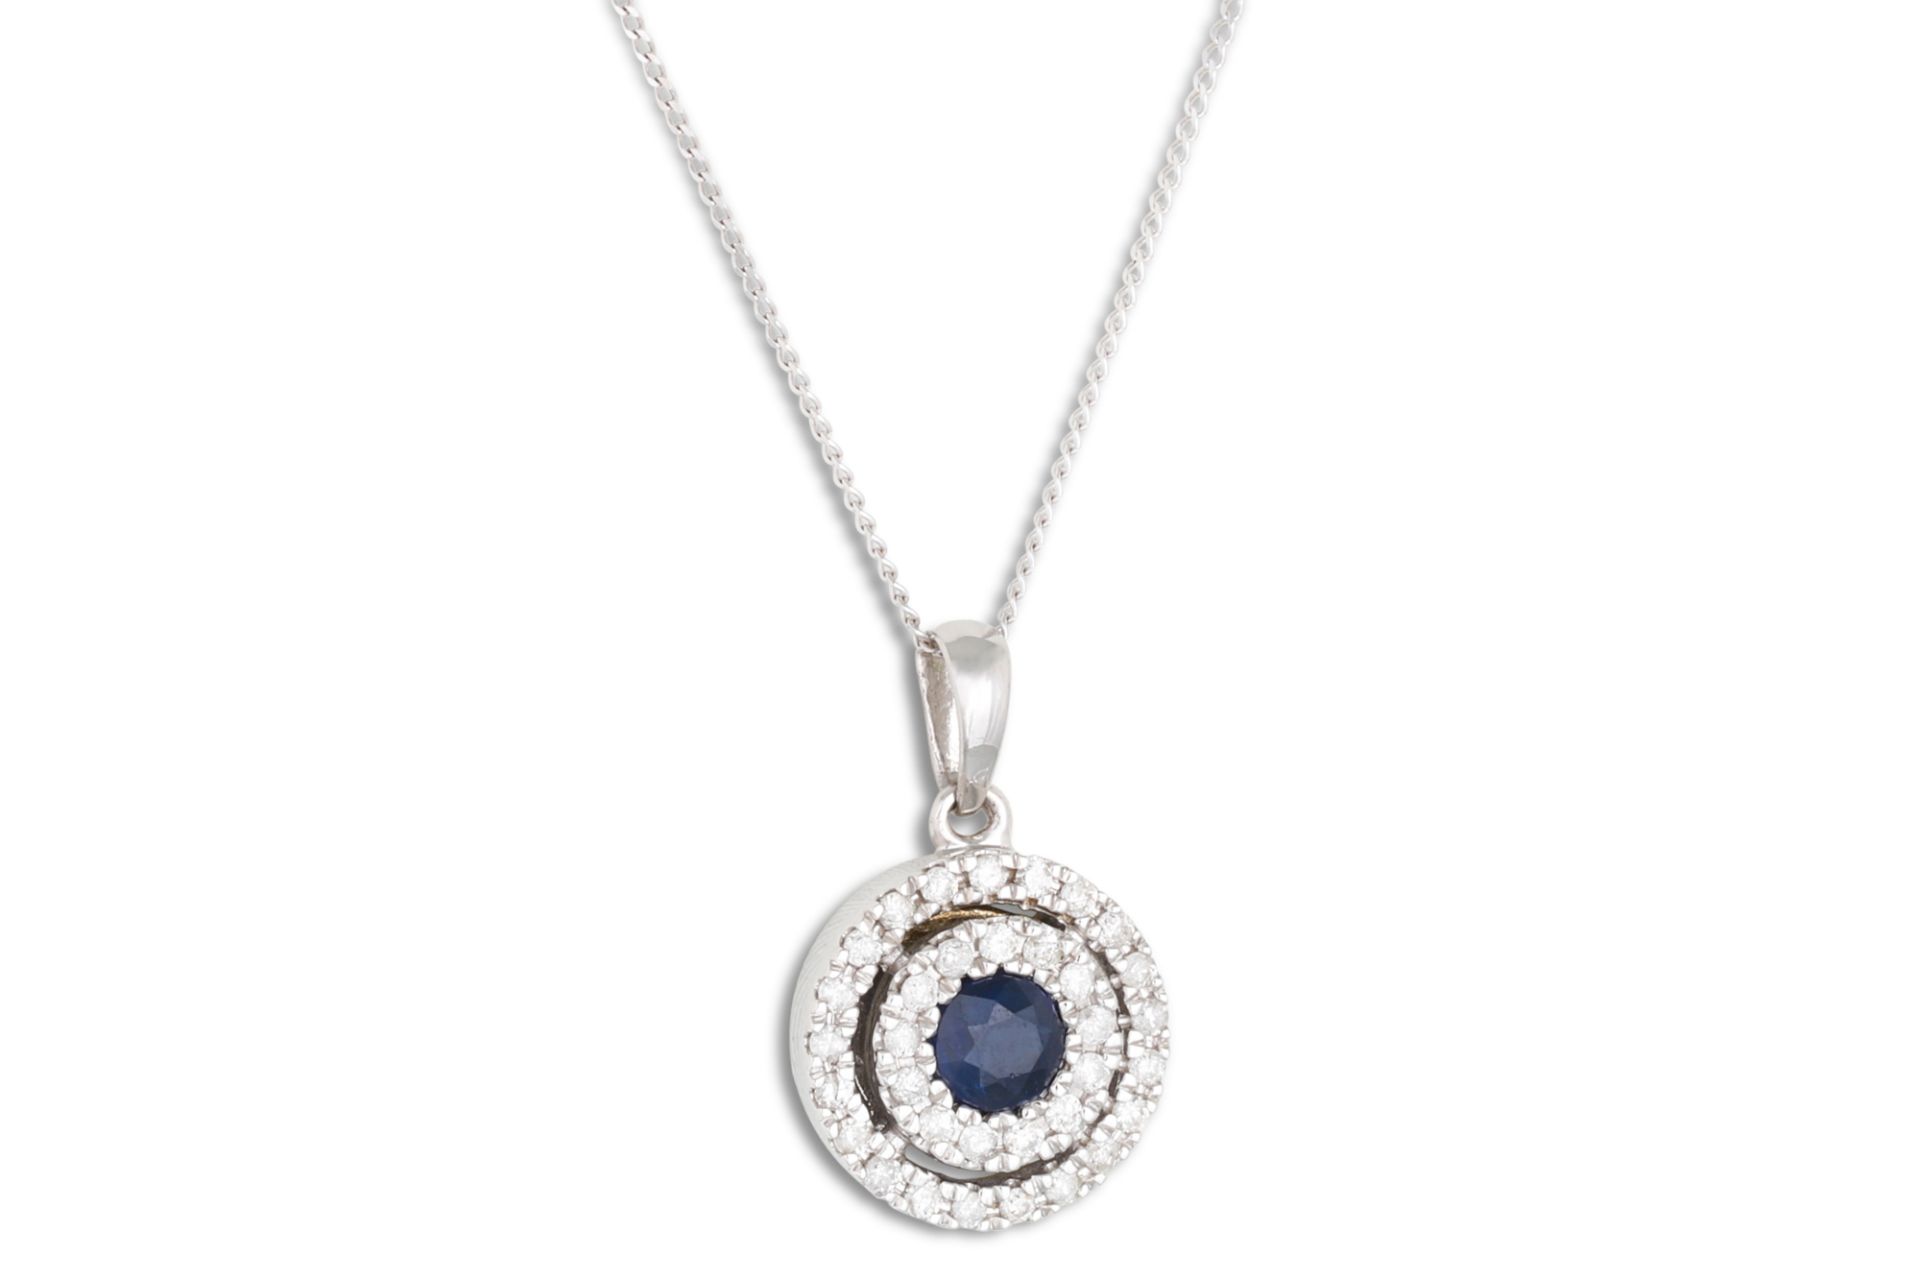 A DIAMOND AND SAPPHIRE TARGET PENDANT, mounted in white gold on a chain